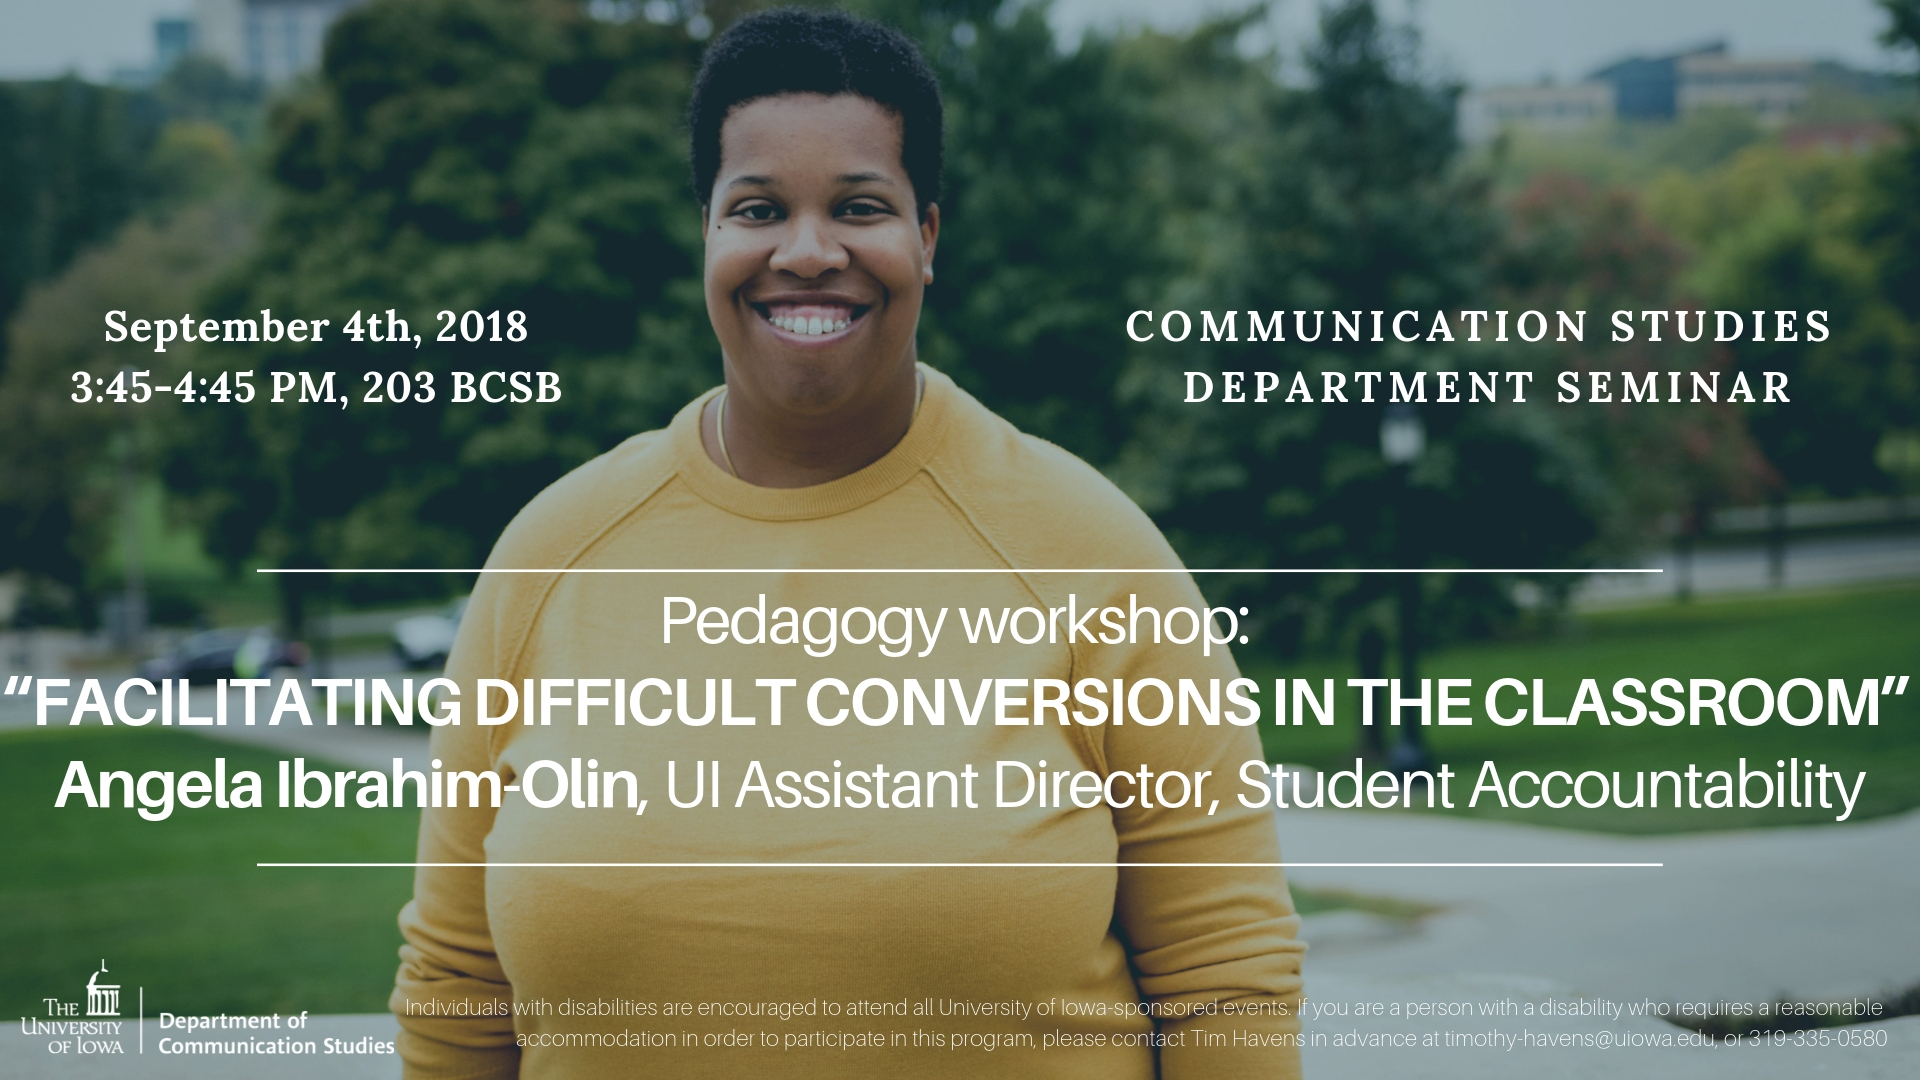 September 4th, 2018  3:45-4:45 PM, 203 BCSB - COMMUNICATION STUDIES DEPARTMENT SEMINAR - Pedagogy workshop:   “FACILITATING DIFFICULT CONVERSIONS IN THE CLASSROOM”   Angela Ibrahim-Olin, UI Assistant Director, Student Accountability